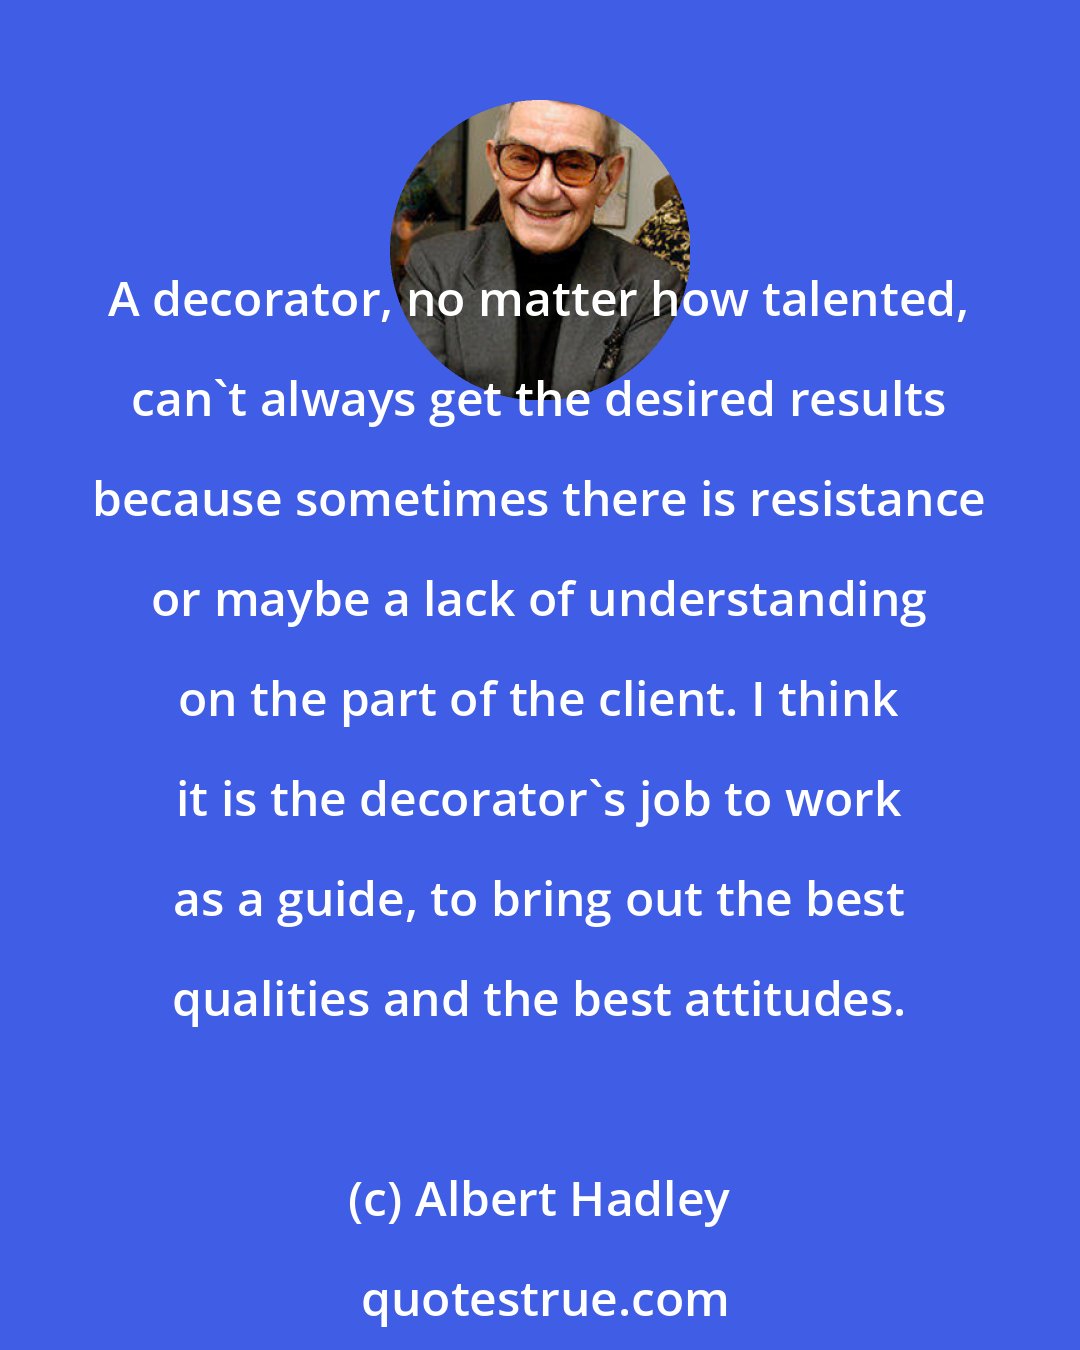 Albert Hadley: A decorator, no matter how talented, can't always get the desired results because sometimes there is resistance or maybe a lack of understanding on the part of the client. I think it is the decorator's job to work as a guide, to bring out the best qualities and the best attitudes.